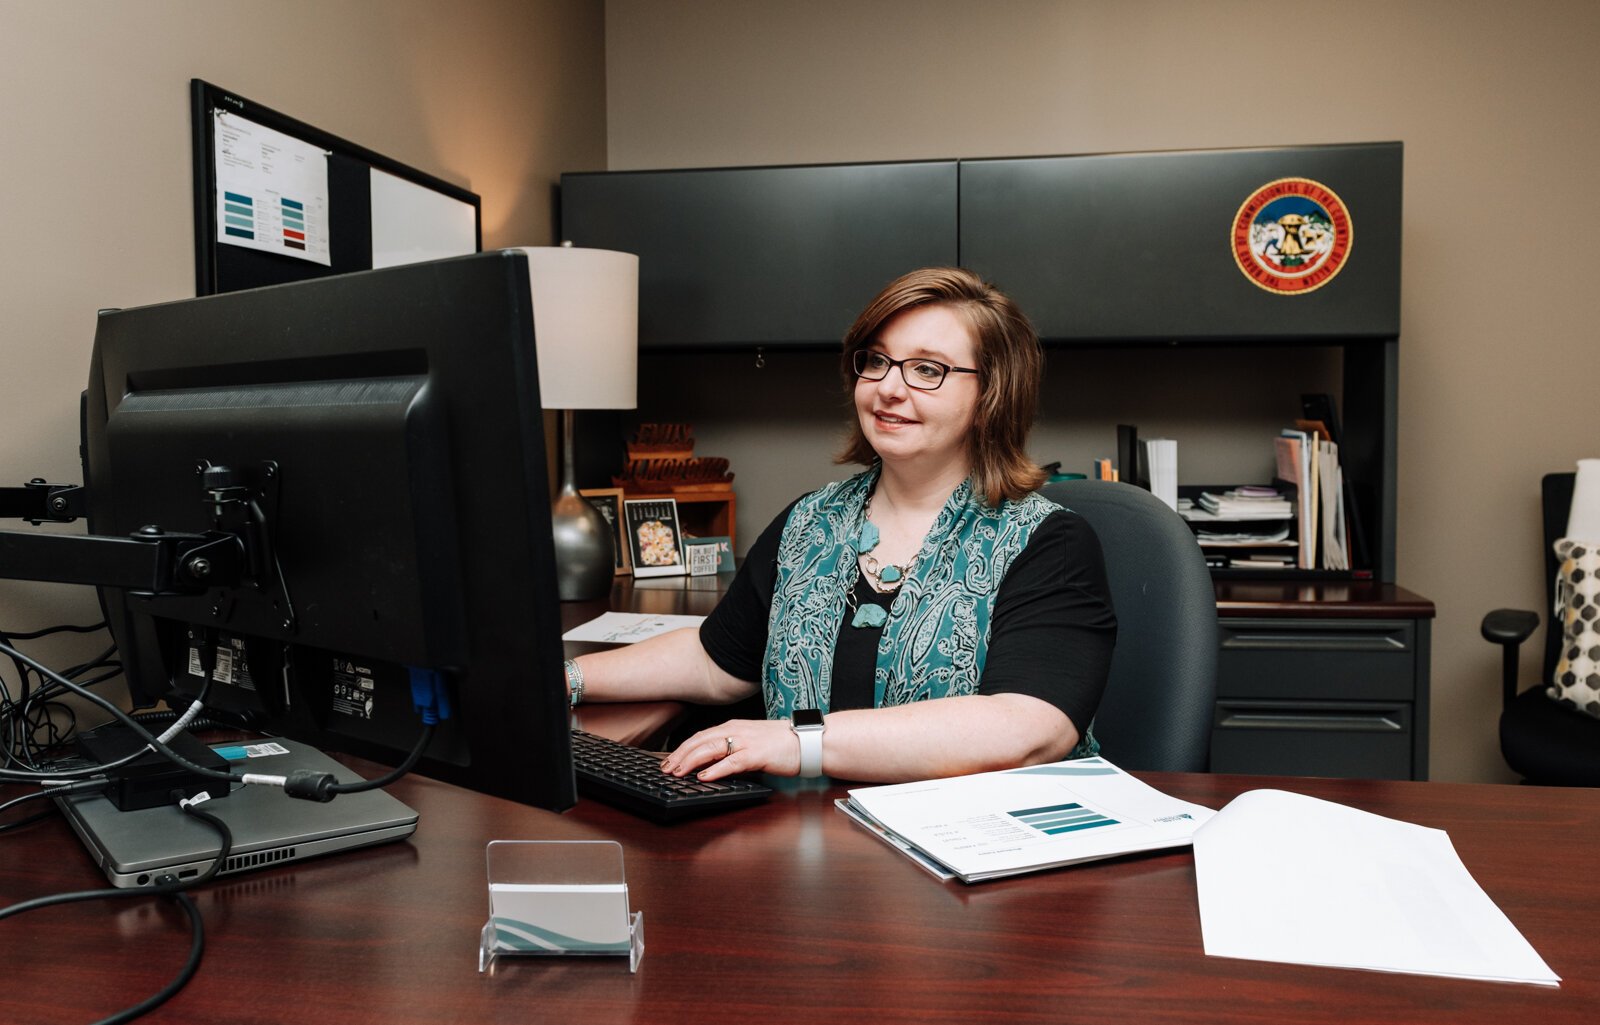 Emily Almodovar, Public Information Officer at Allen County works at her desk at Citizens Square.